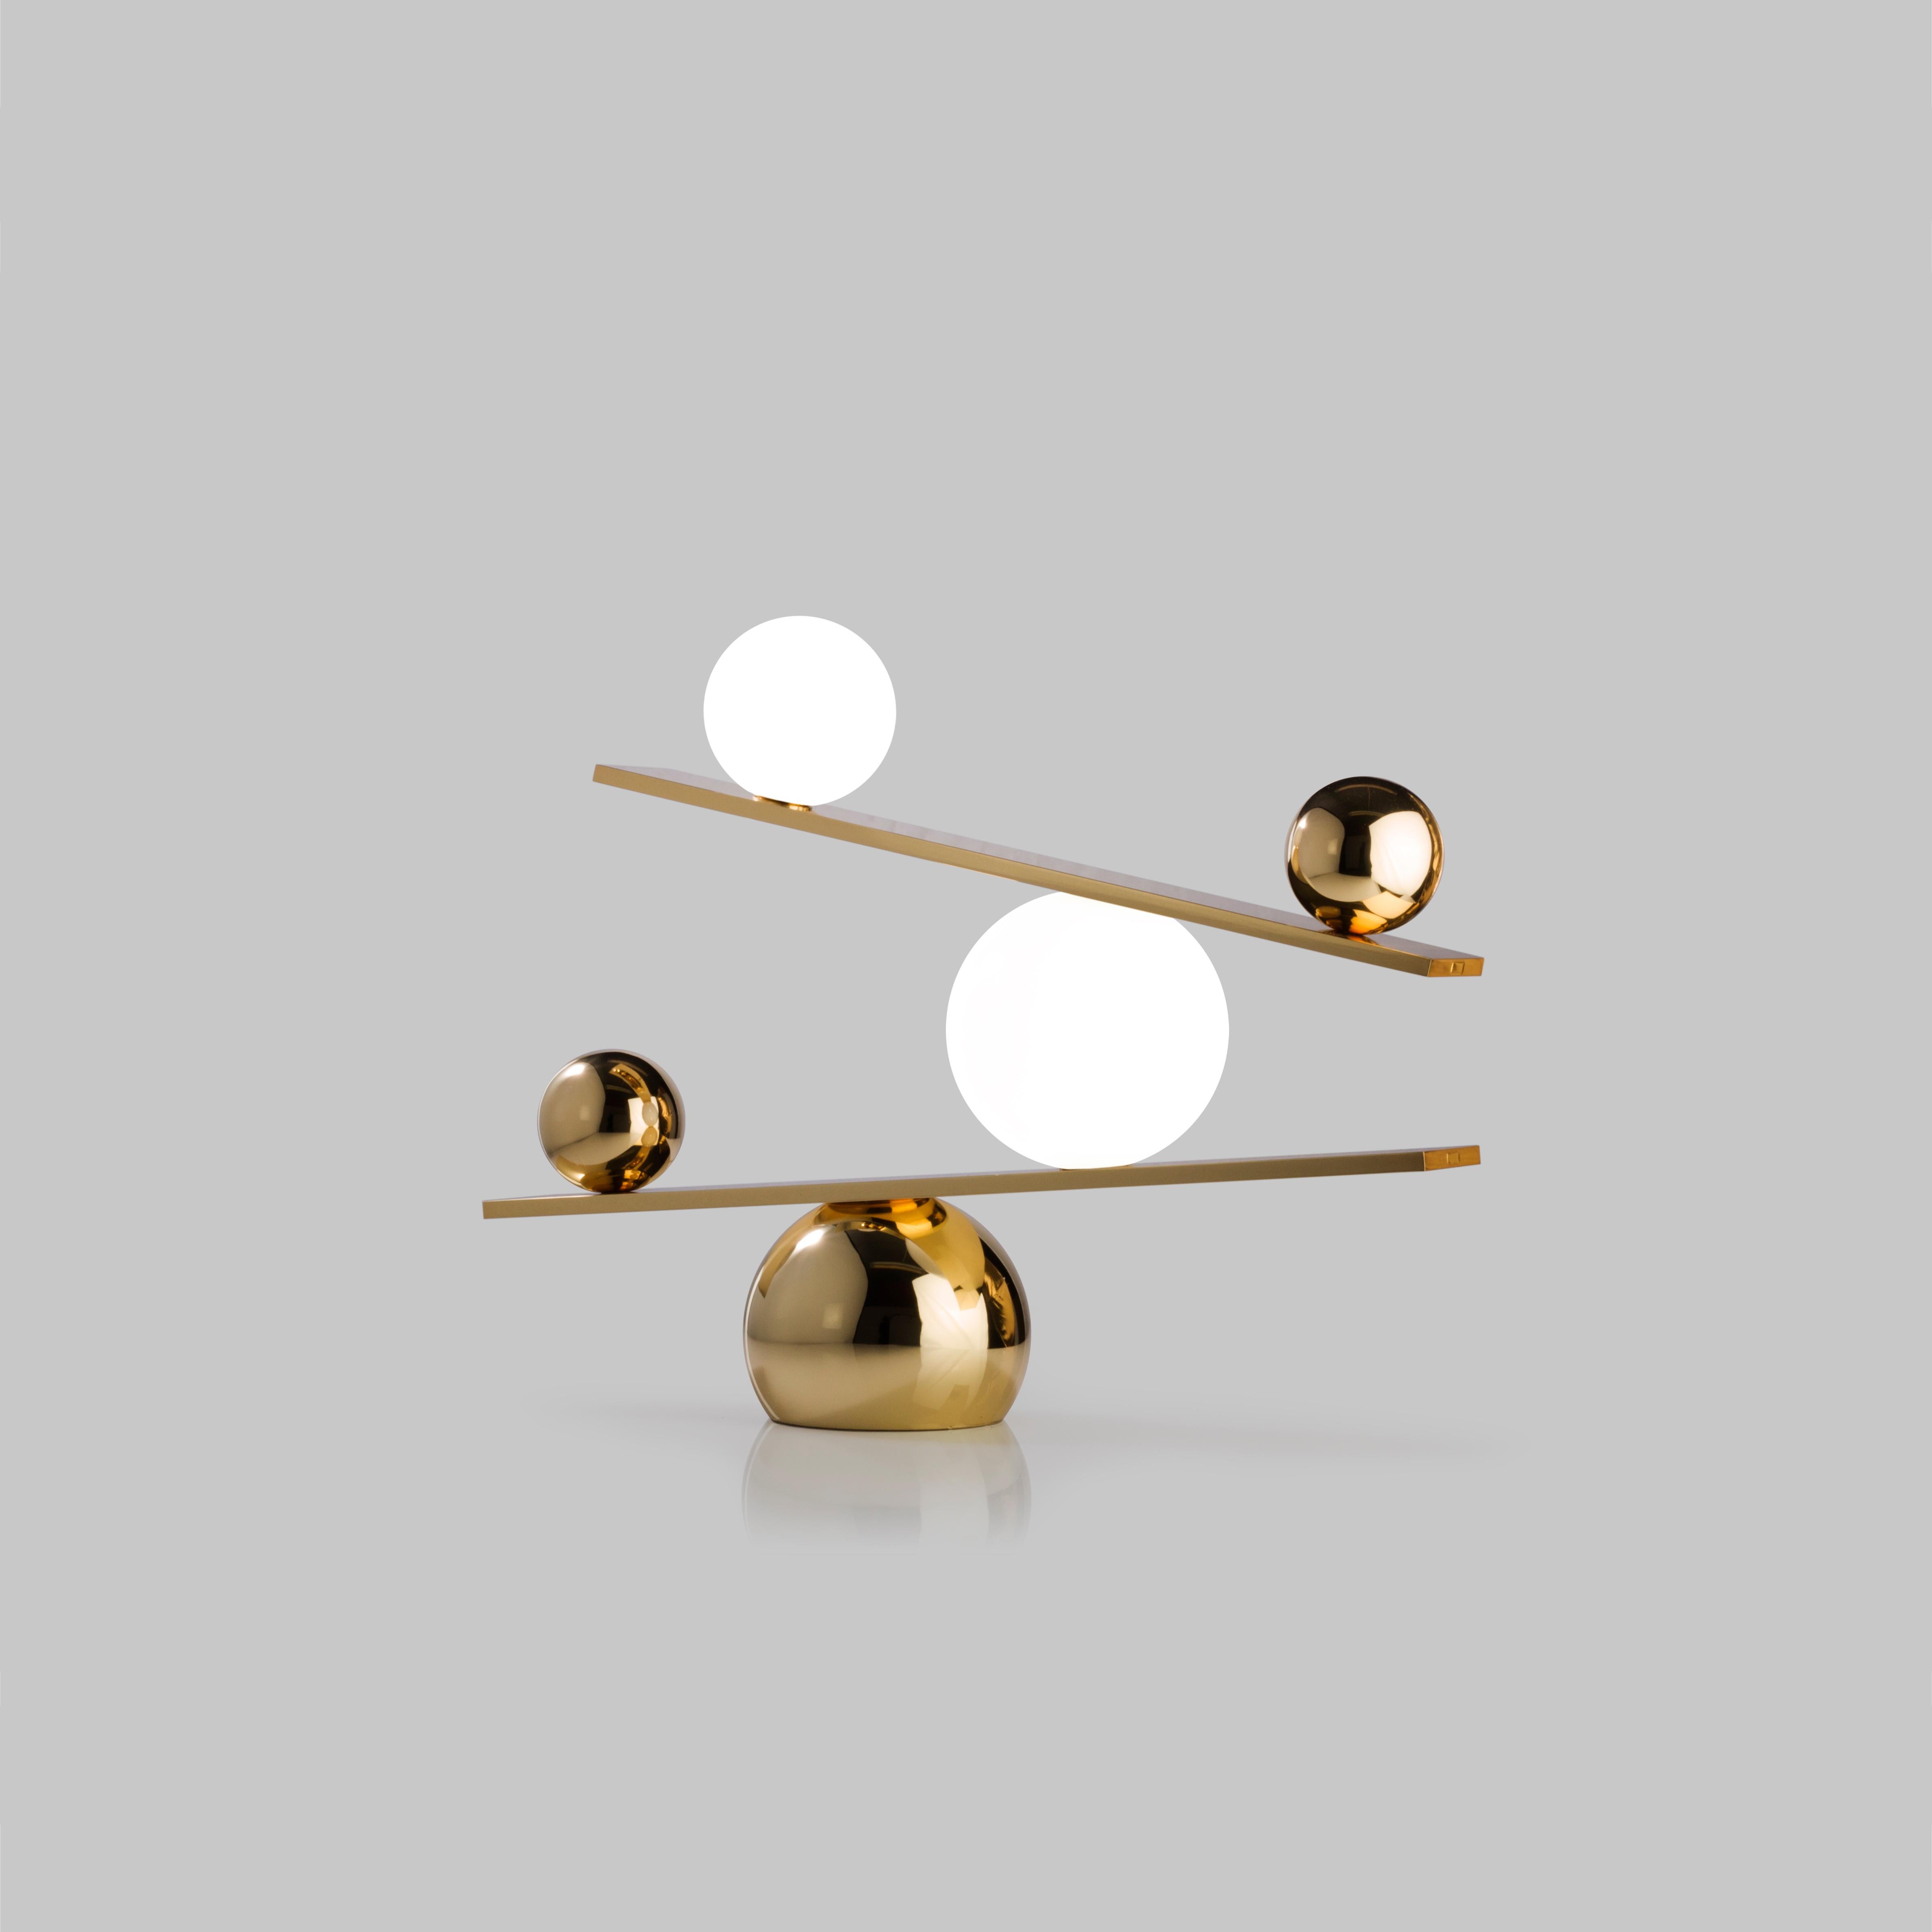 Balance brass table lamp by Victor Castanera 
Balance is a playful and curiosity evoking tribute to the concepts of gravity and time.
Dimensions: 40 (H) x 53.5 (L) x 13 cm
Materials: Plated brass with steel base (also available in Glossy paint